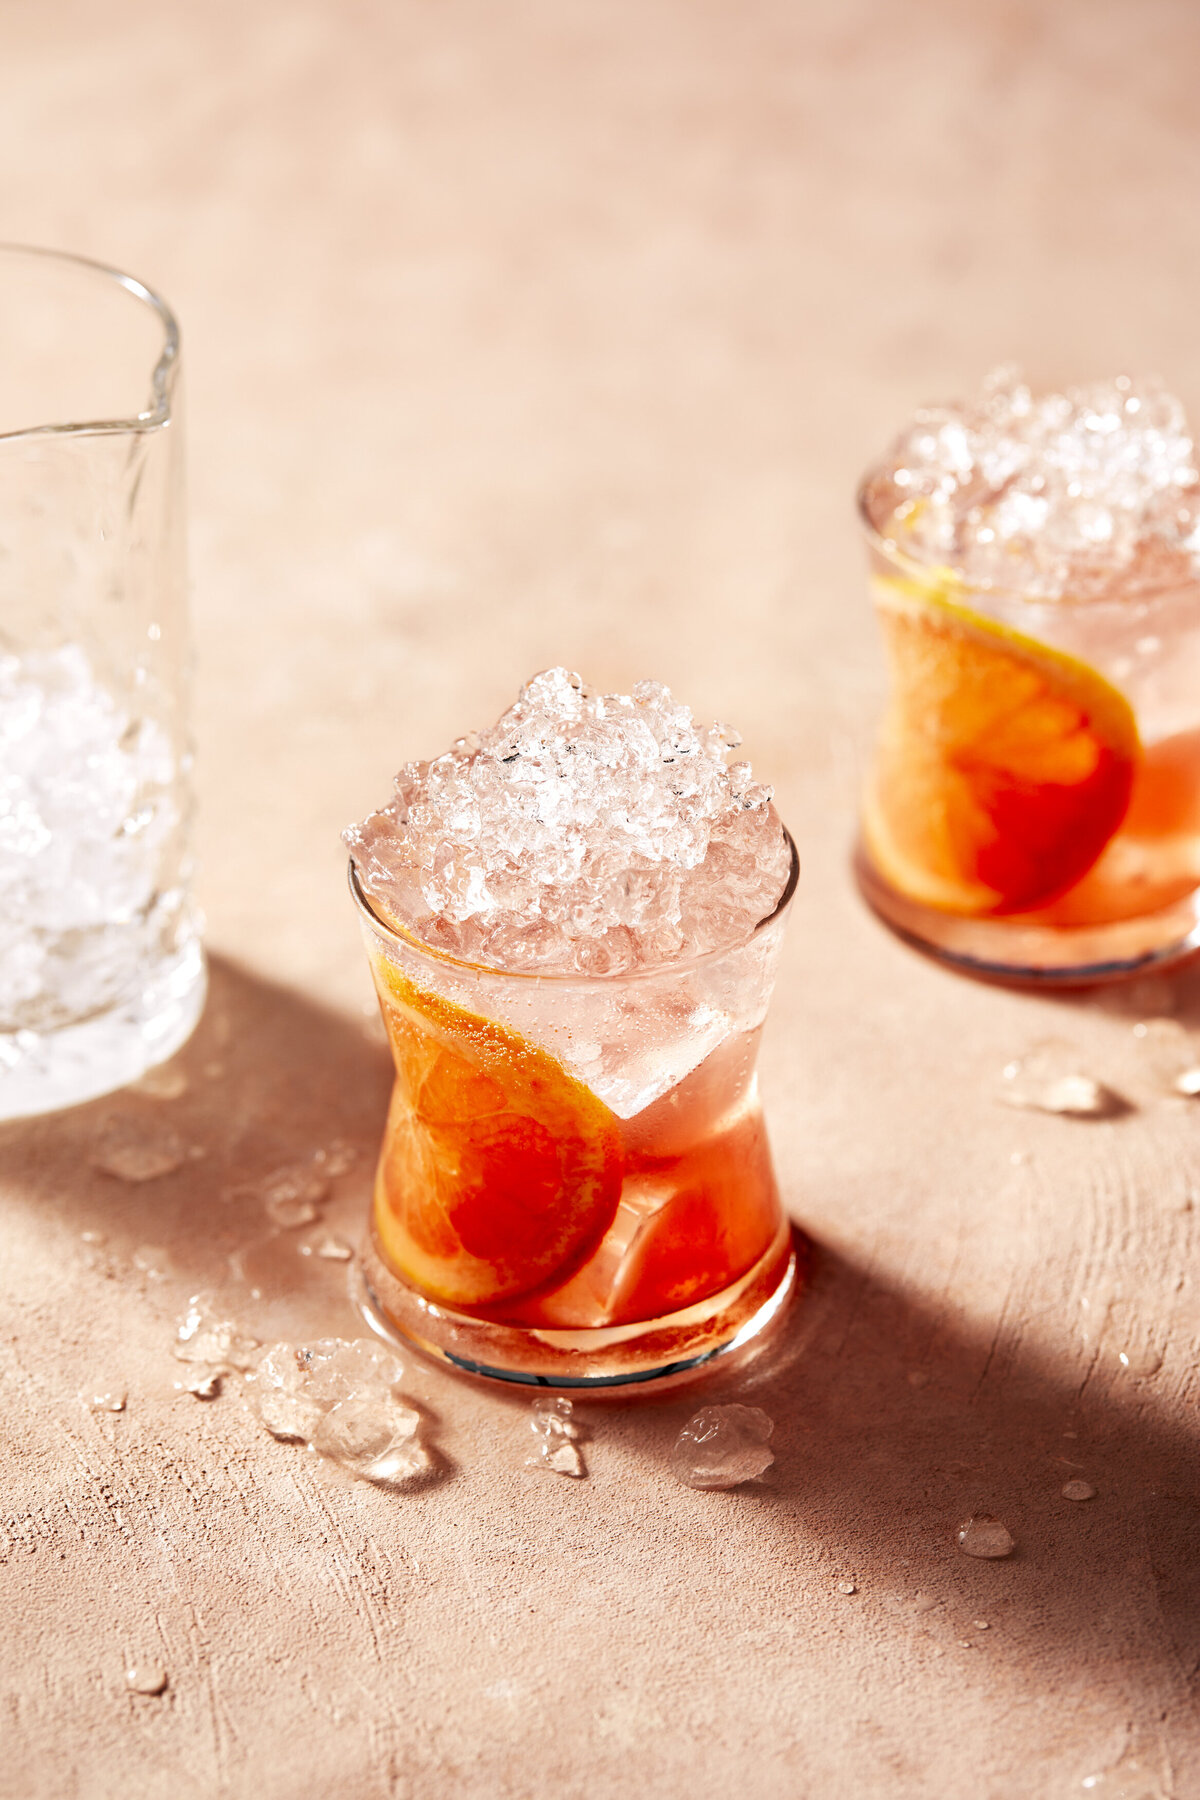 Two small glasses filled with ice and fruit.